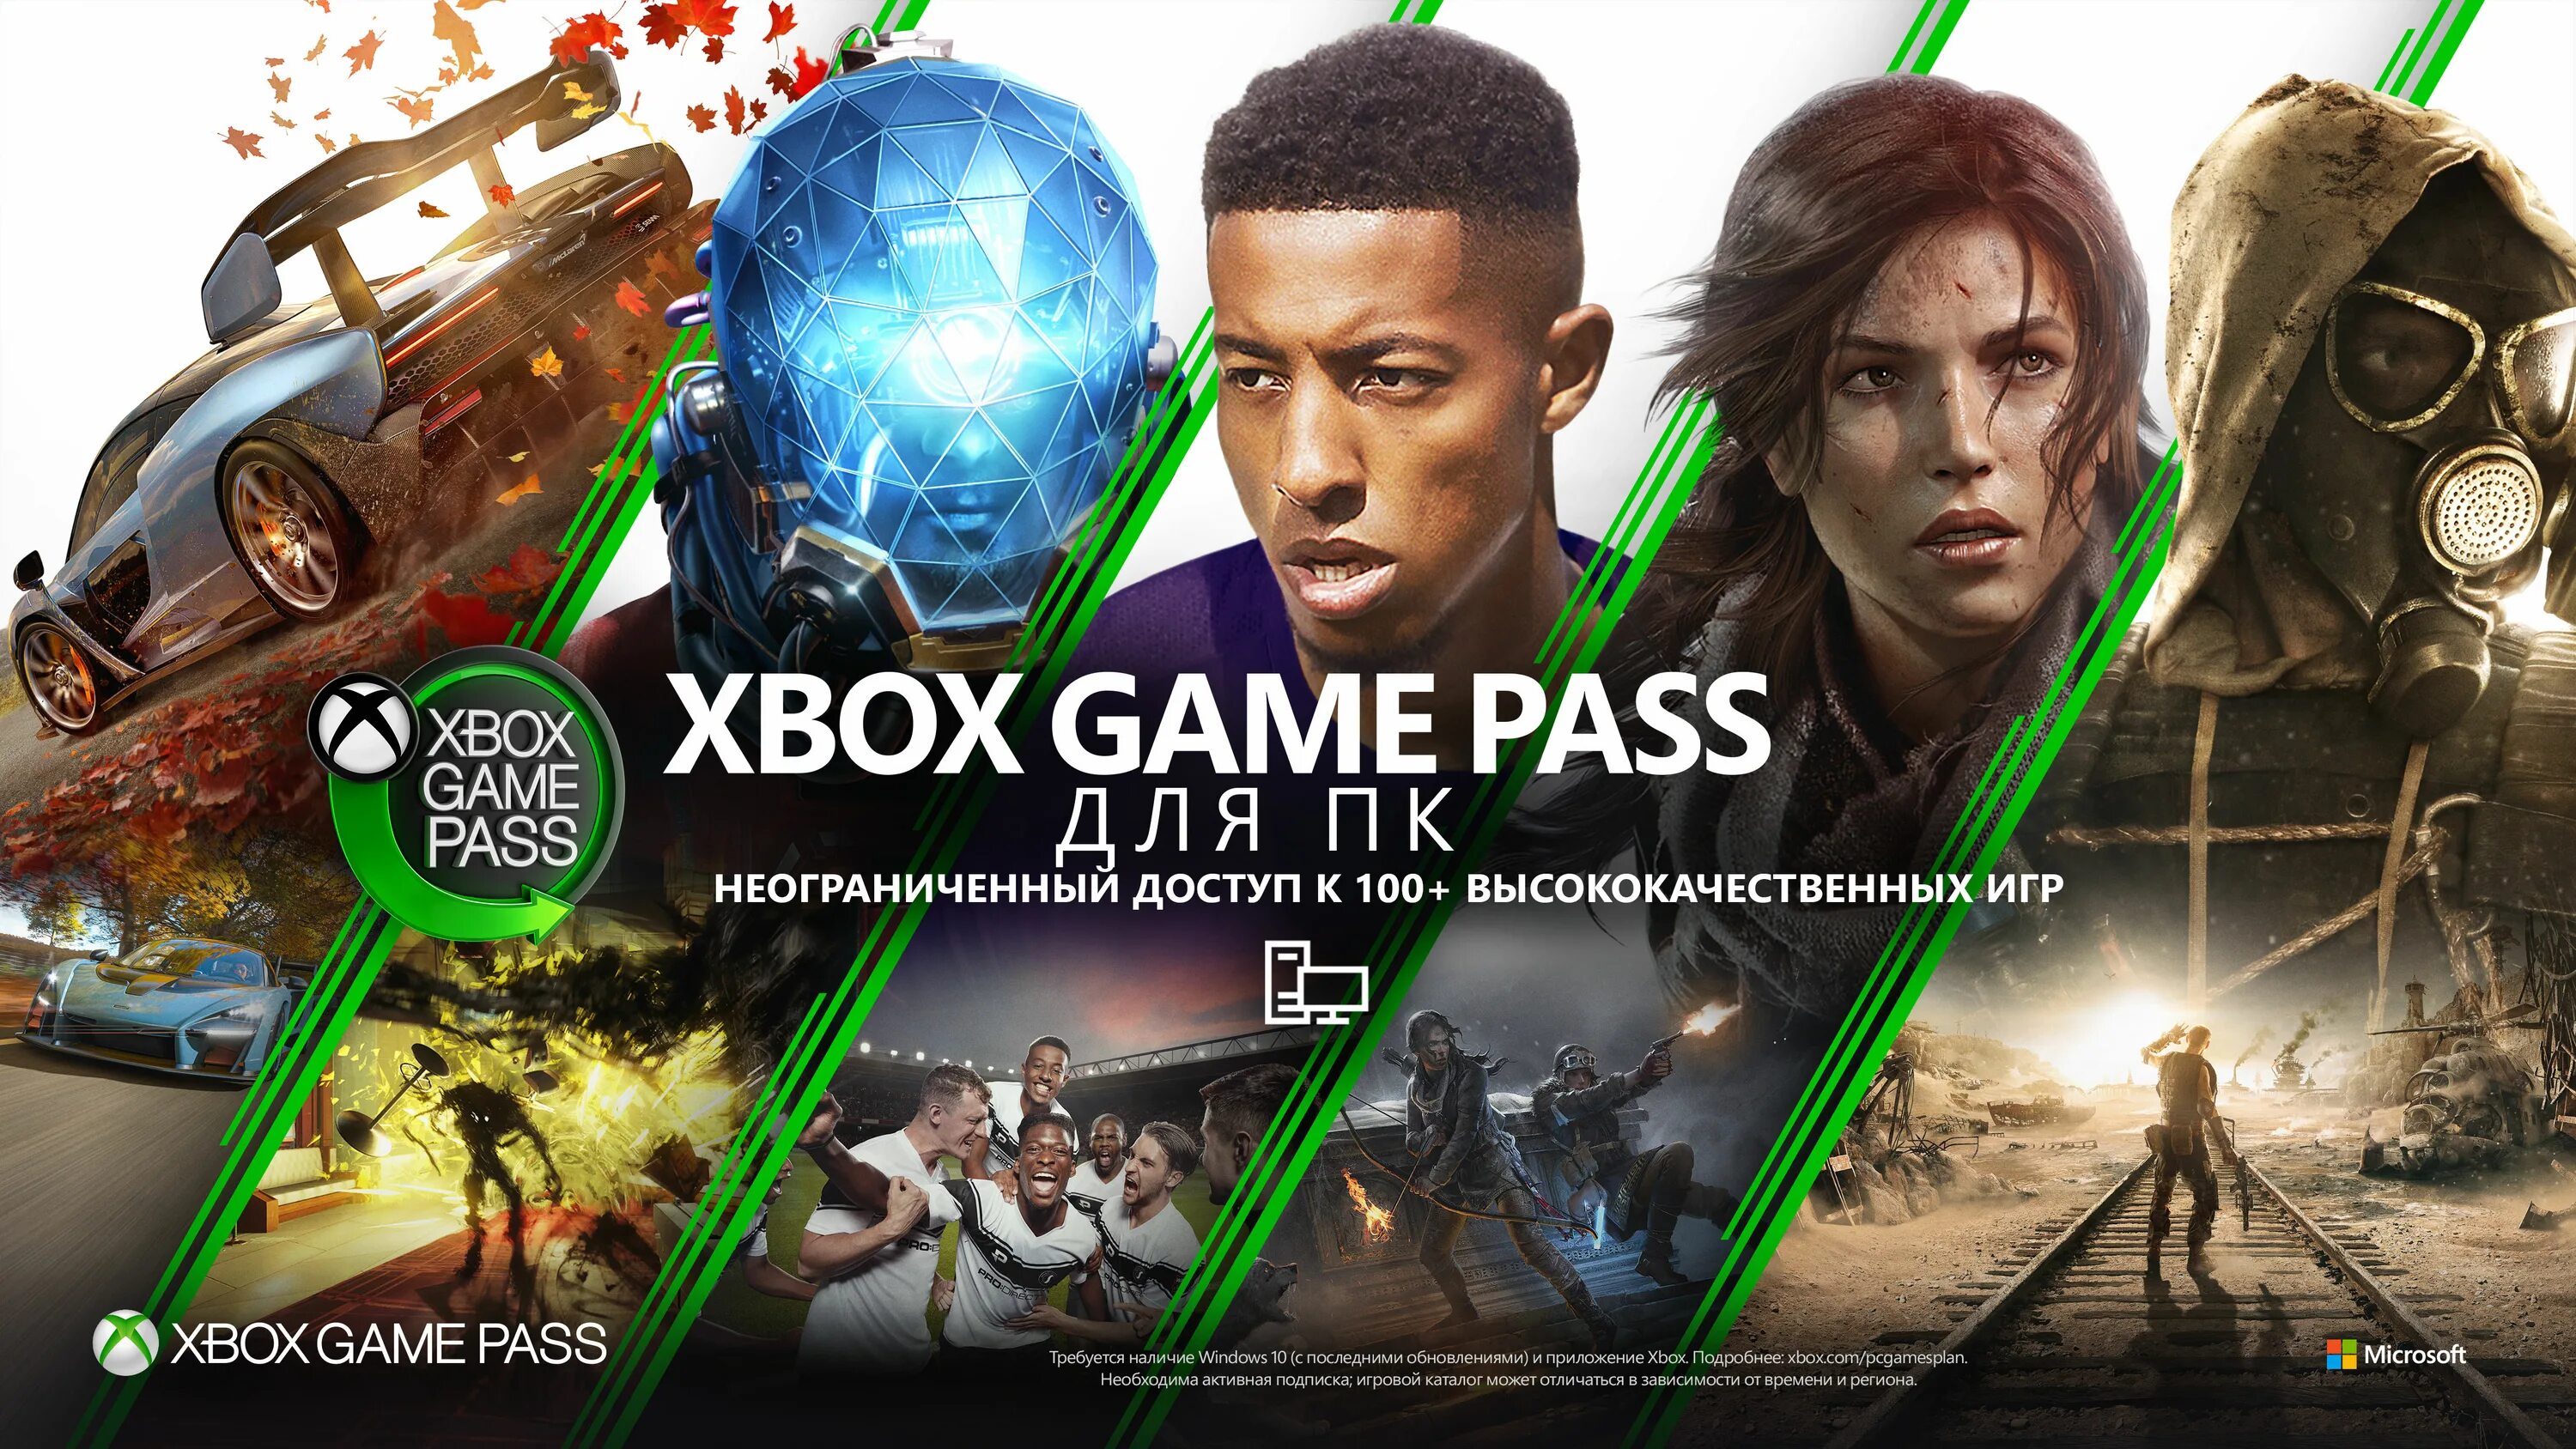 Xbox game pass apk. Xbox game Pass Ultimate 2 месяца. Xbox game Pass 3 PC. Гаме пасс для иксбокс игры. Xbox game Pass Ultimate PC.